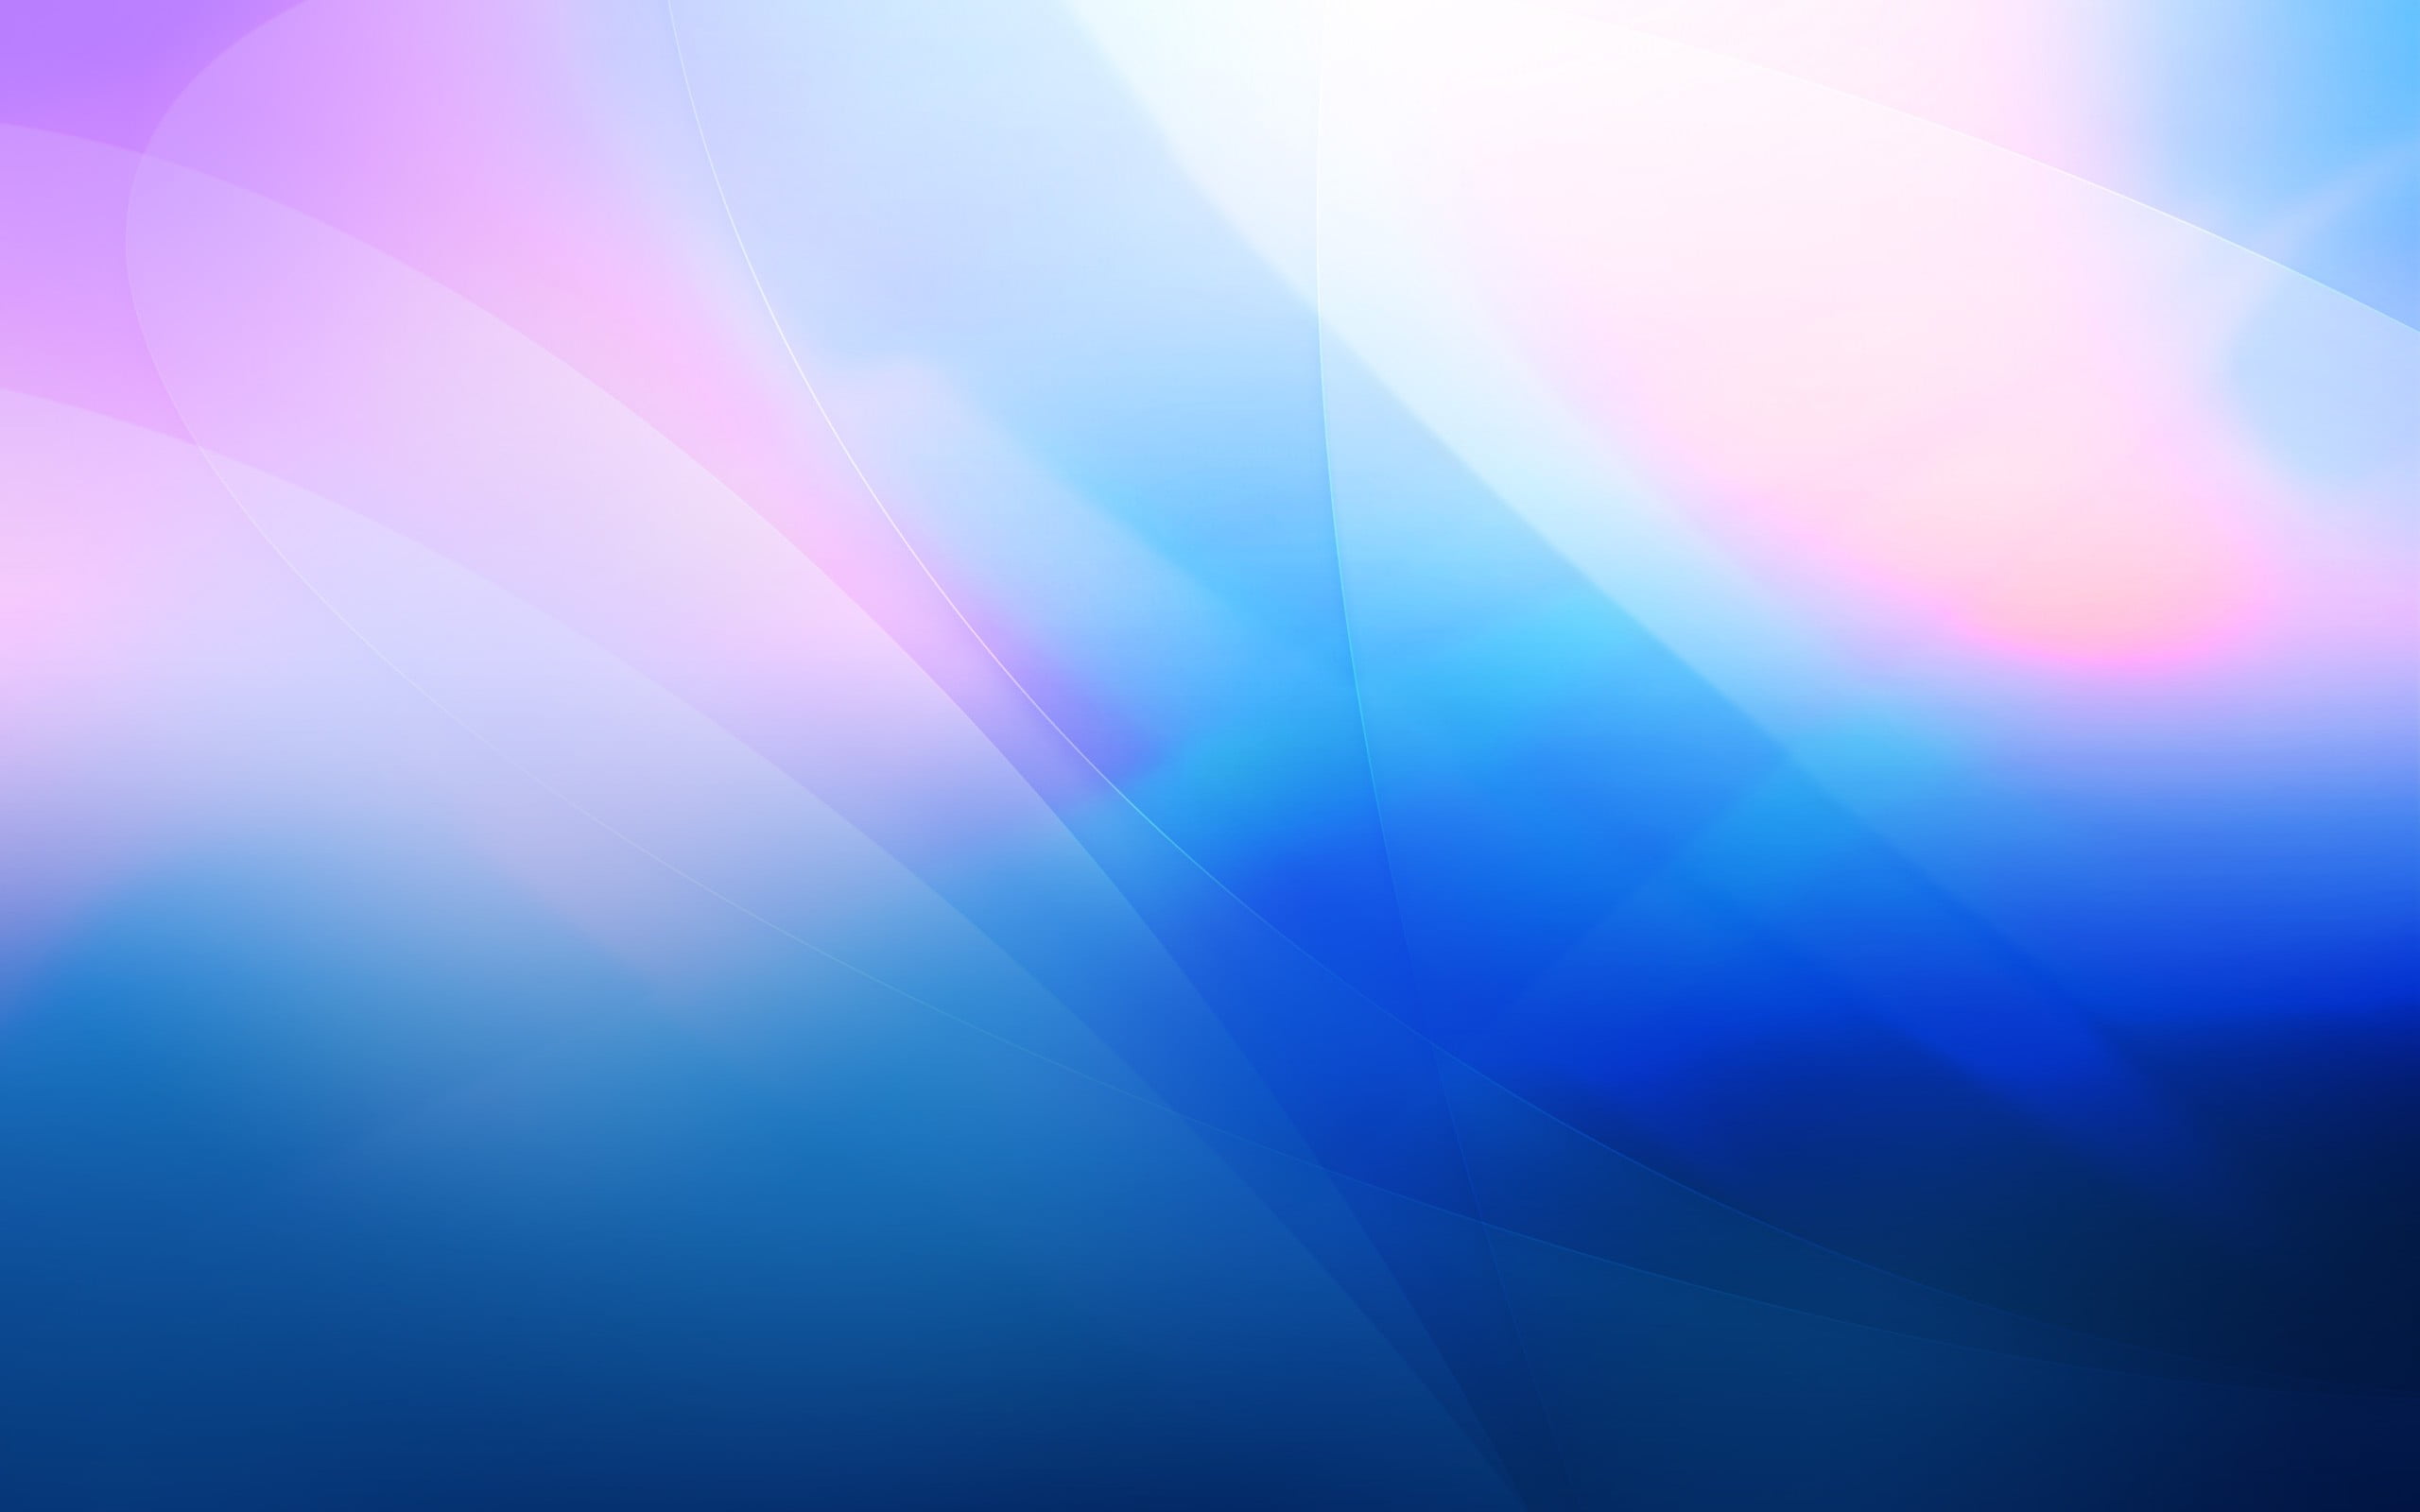 blue-and-white-led-light-abstract-hd-wallpaper-wallpaper-flare